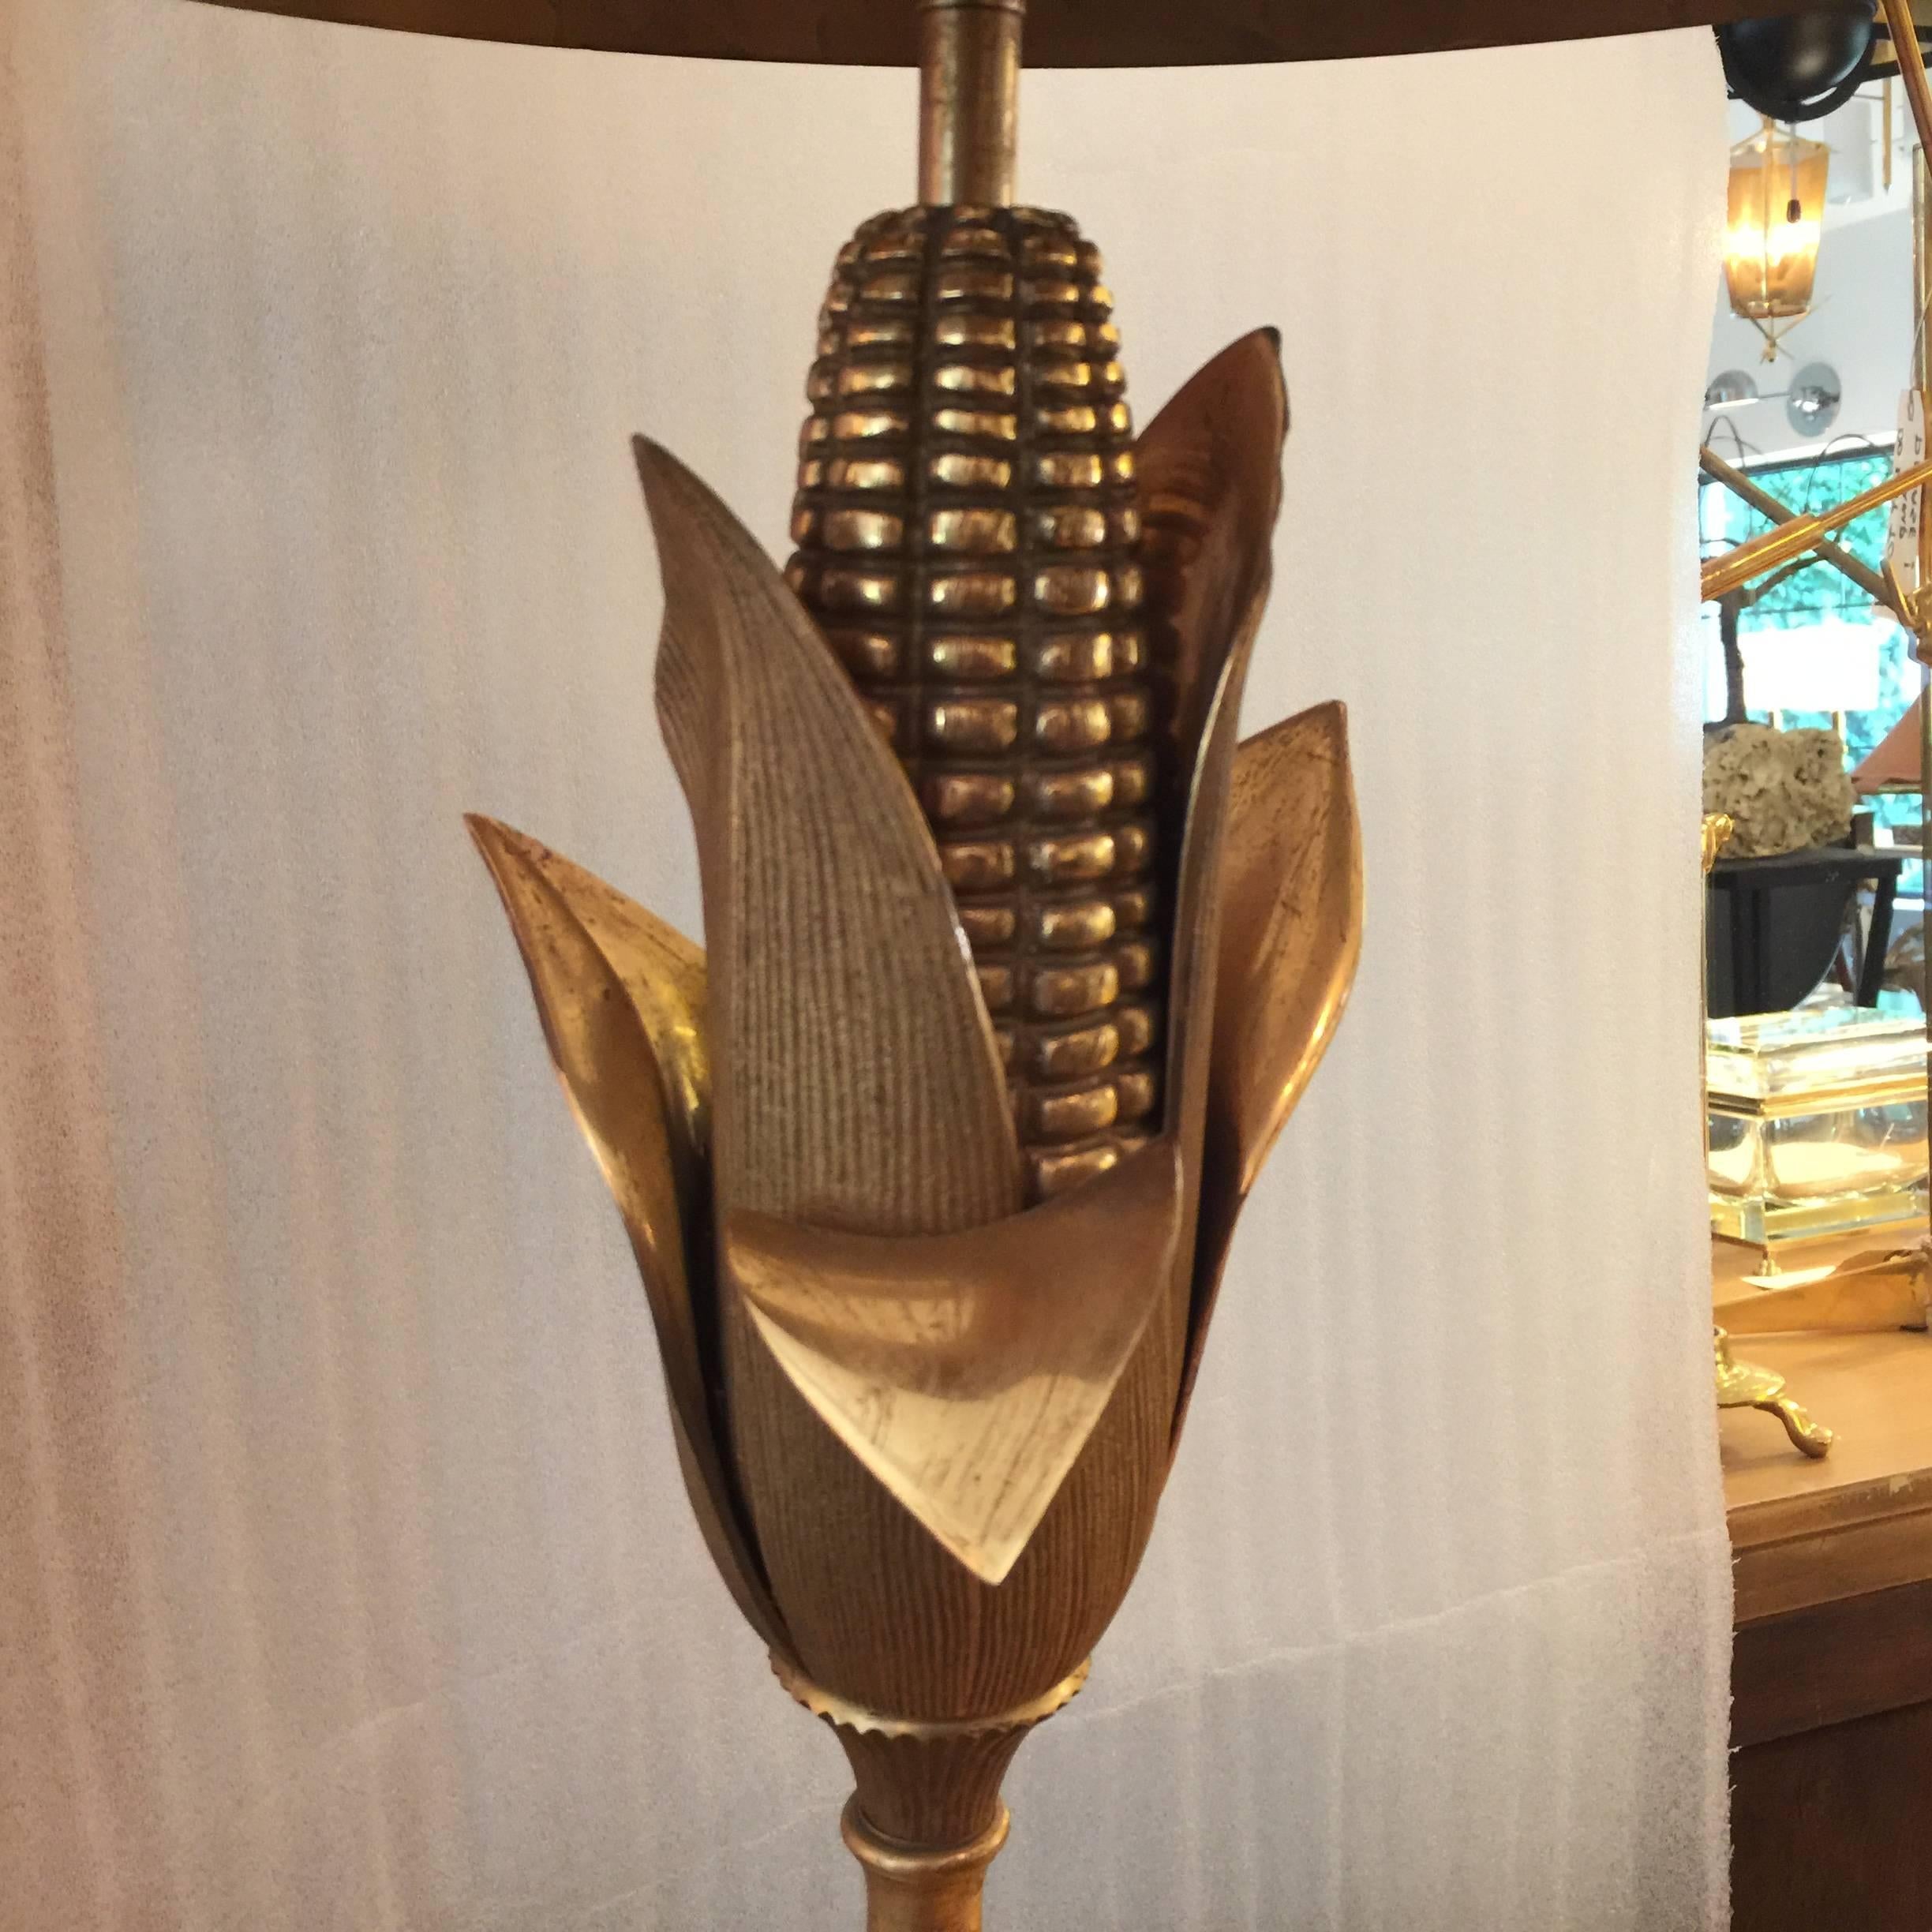 Classic corn motif by Maison Charles et Fils with original brass shade and finial. Rewired with silk cord.

The corn, a symbol of growth, was used as a metaphor for France's post war resurgence. (Post Art Deco/modern neoclassical).